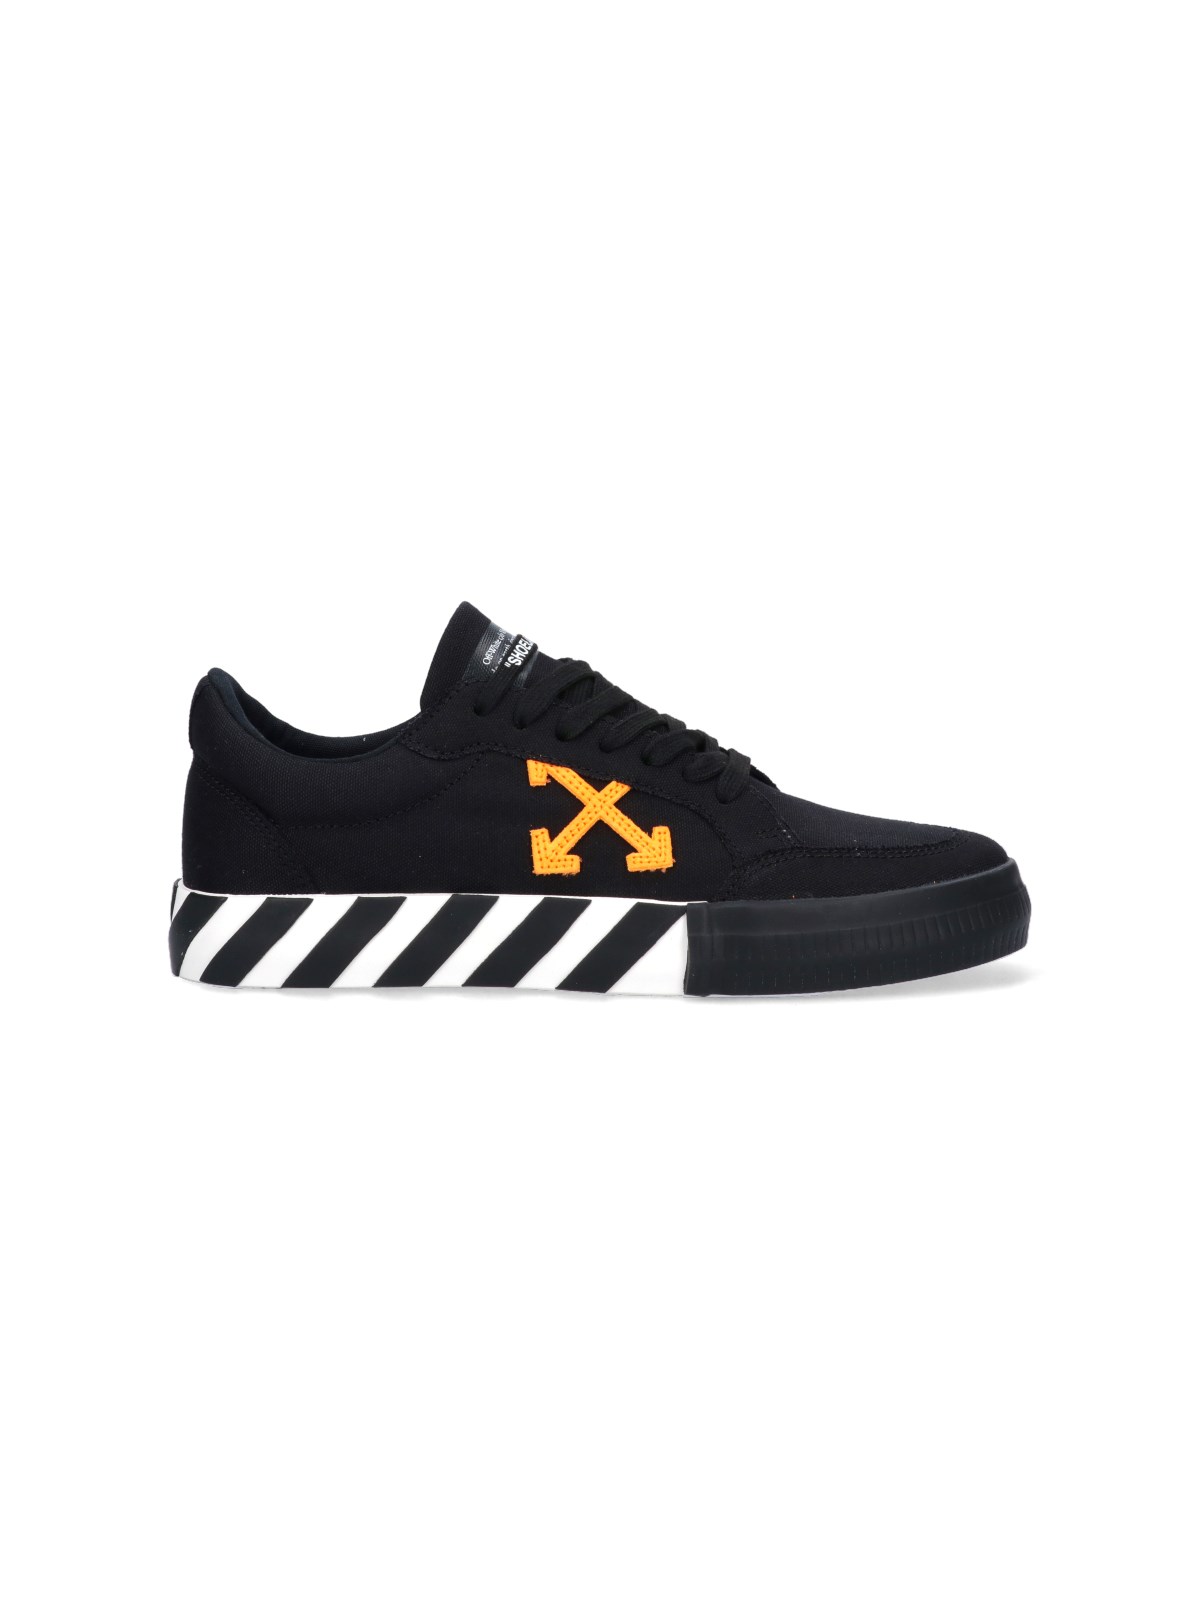 OFF-WHITE 'VULCANIZED' LOW-TOP SNEAKERS